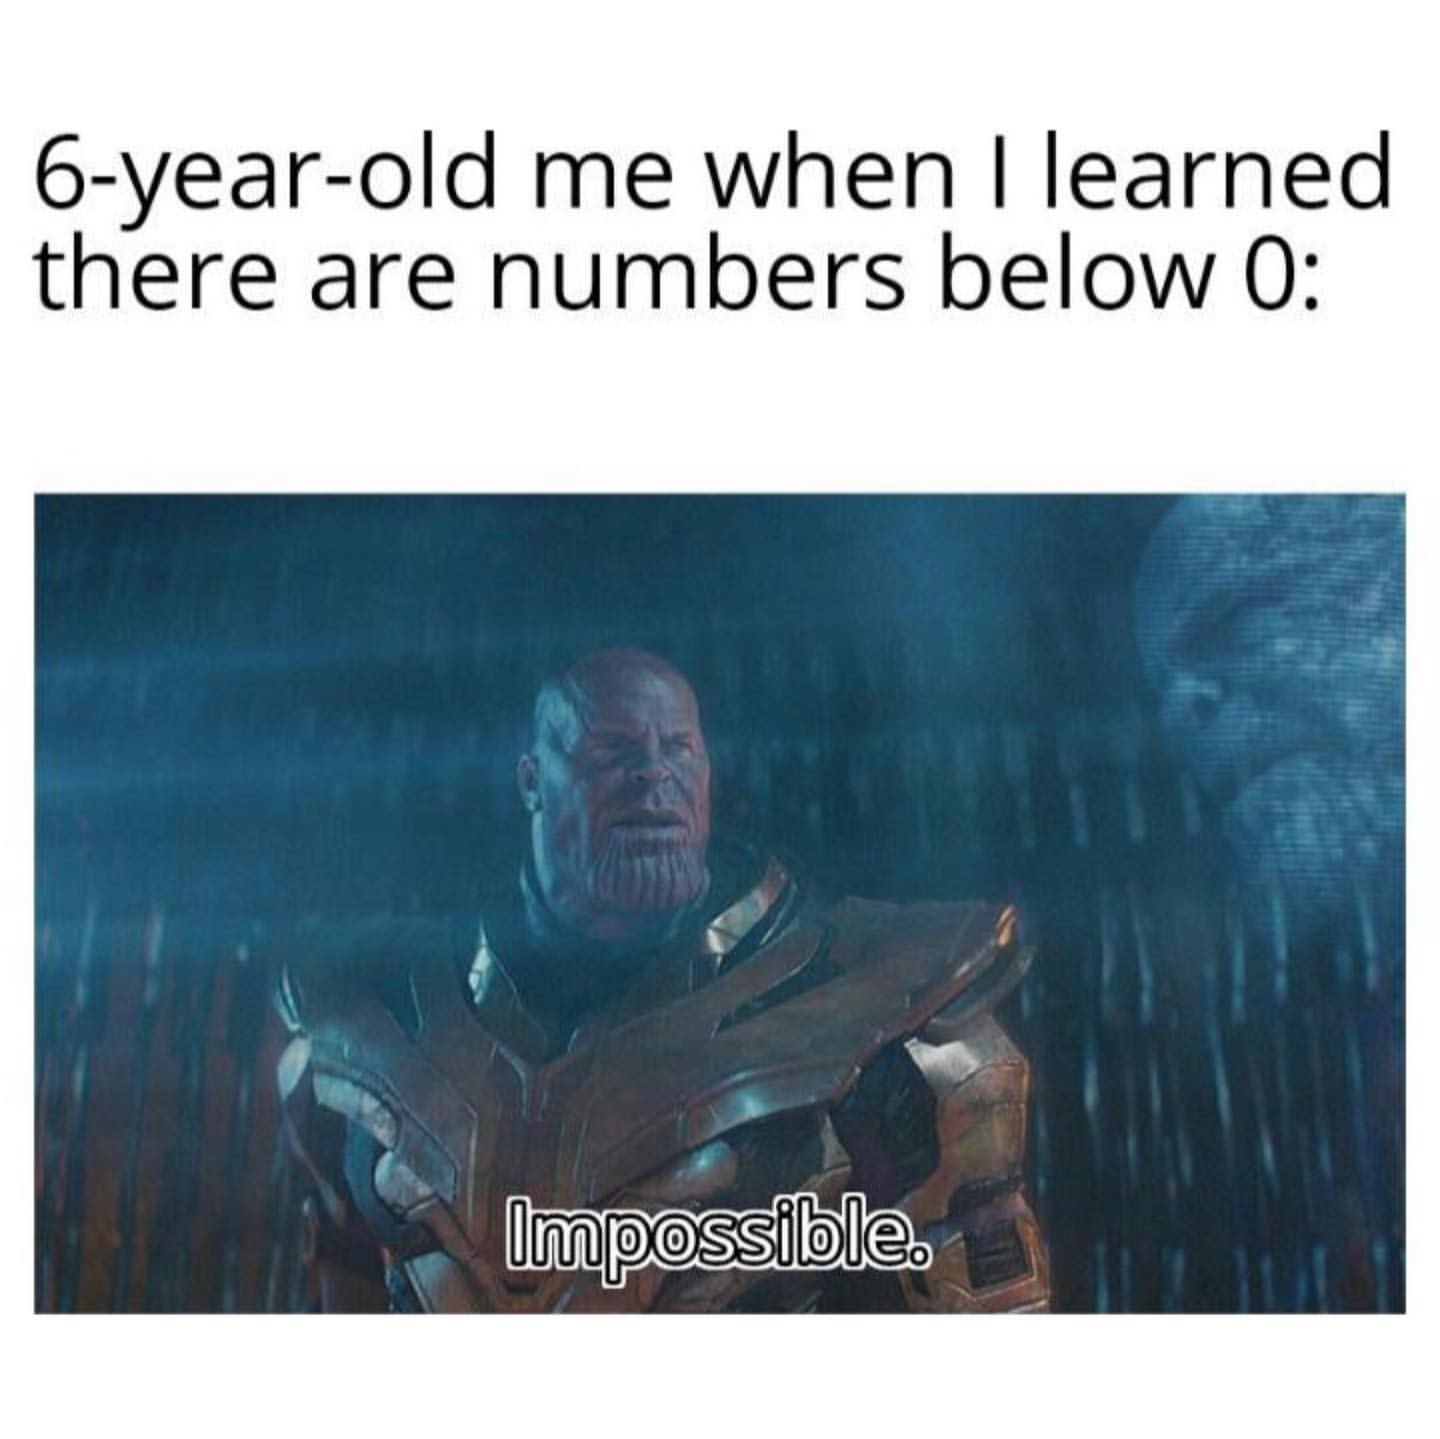 6-year-old me when I learned there are numbers below 0: Impossible.